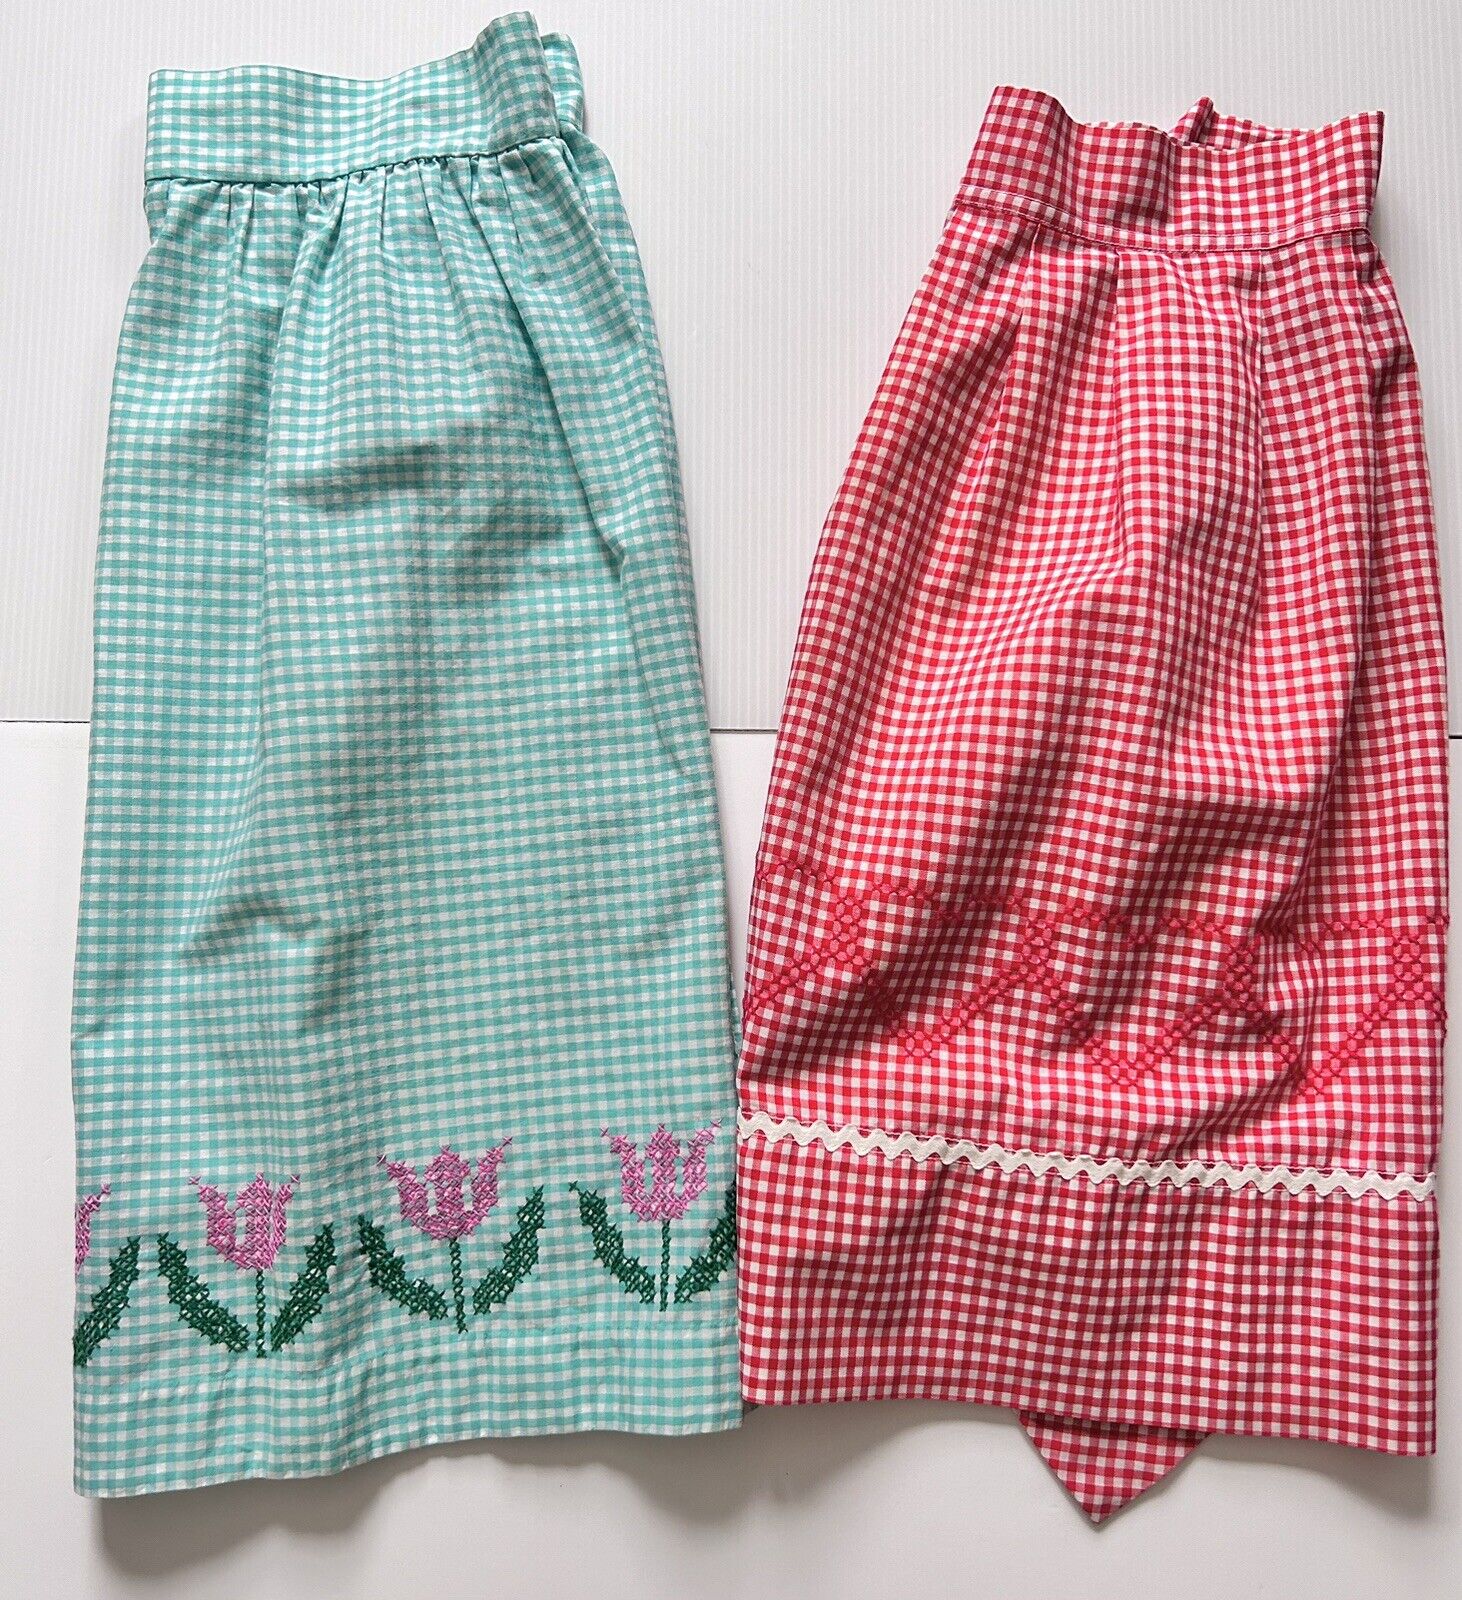 Vintage Gingham Half Aprons Red Aqua Embroidered Tulips Hearts Lot 2